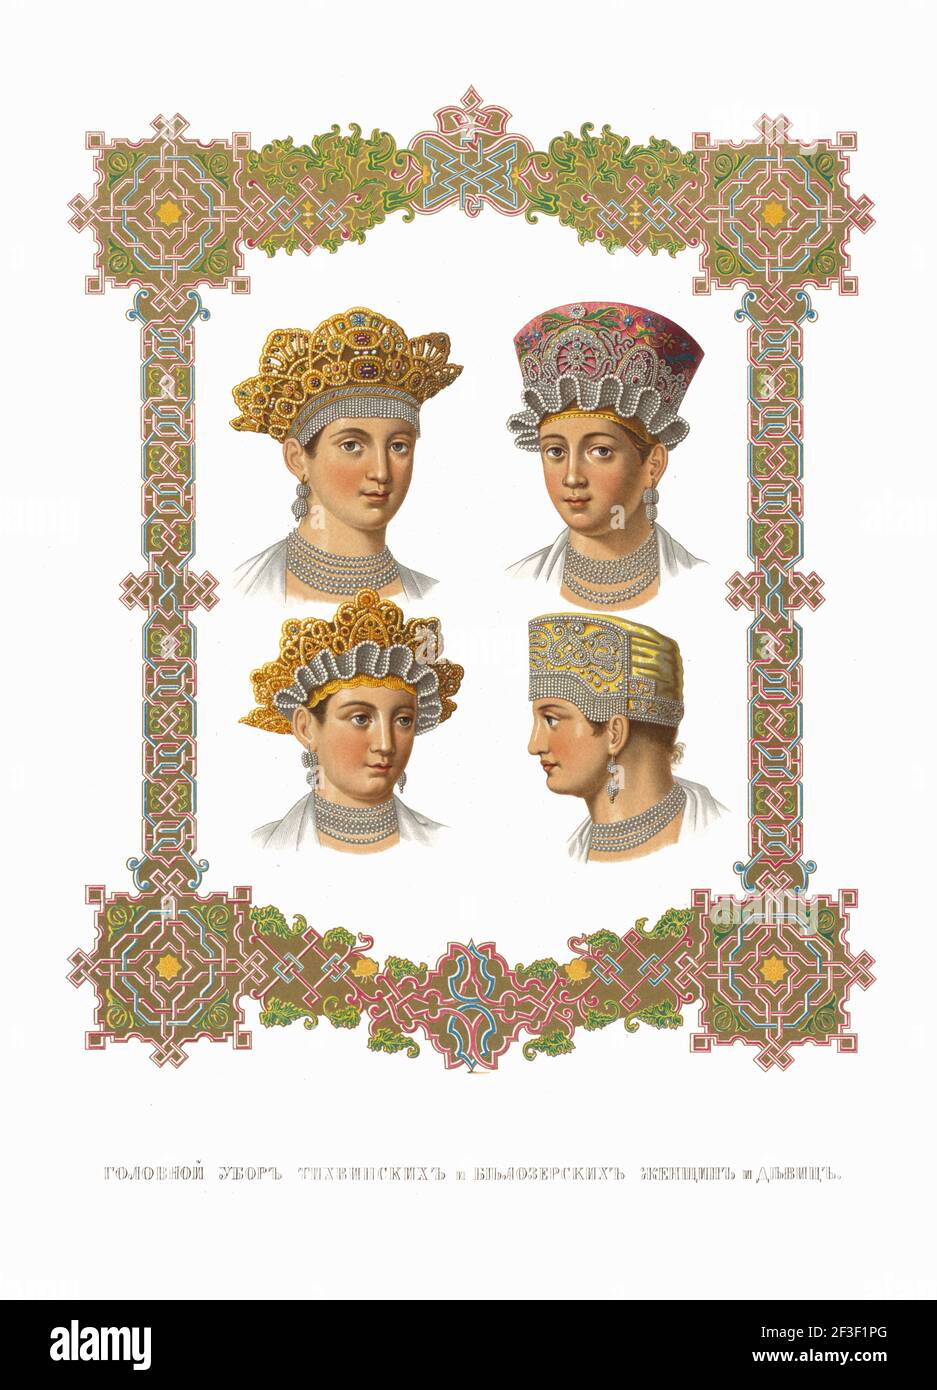 Girls and women headgear of Tikhvin and Belozersk. From the Antiquities of the Russian State, 1849-1853. Private Collection. Stock Photo